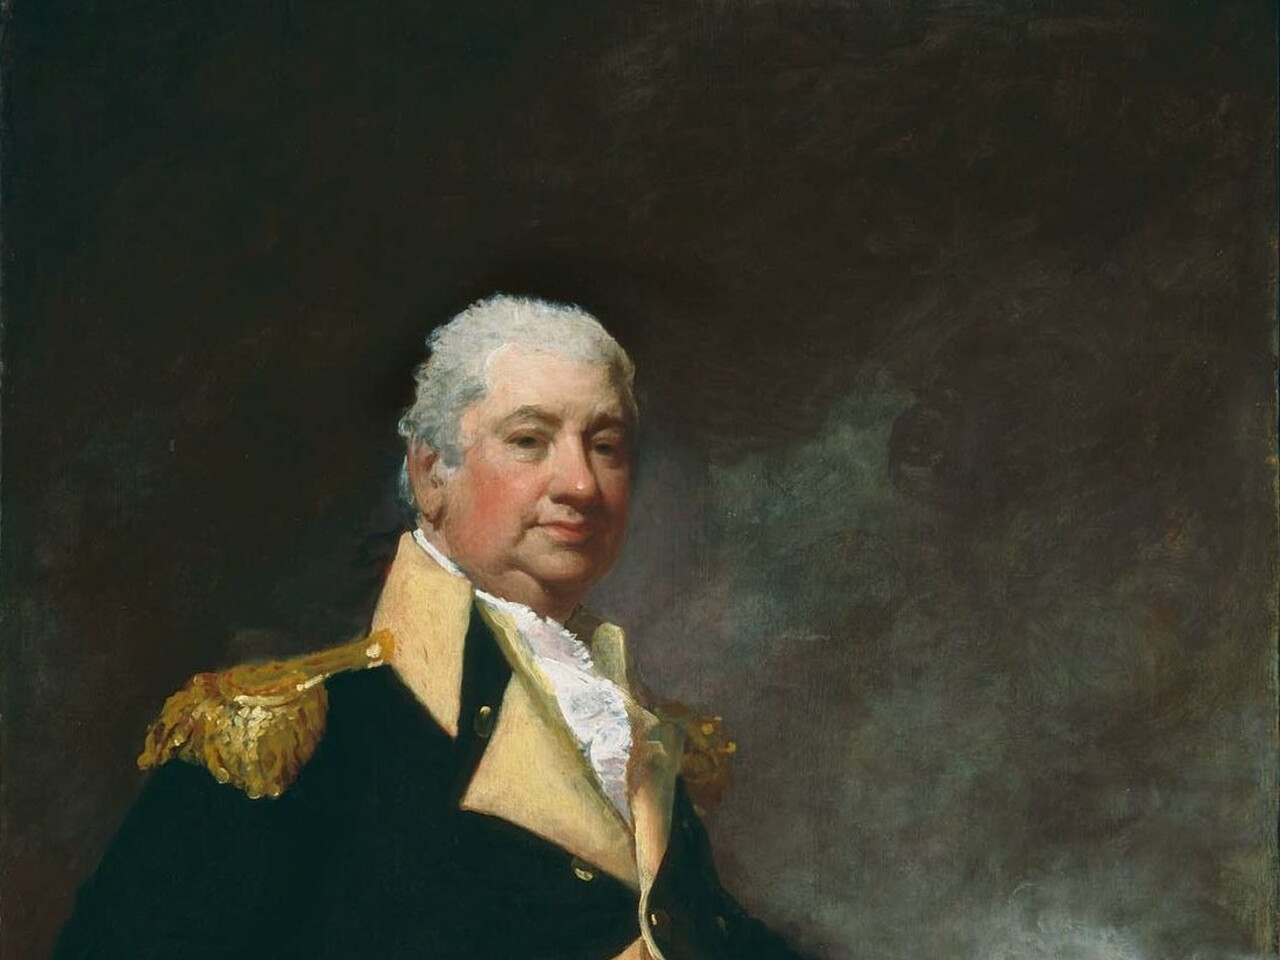  Painting of Henry Knox in a navy and gold uniform. Knox is posing with one hand on his hip and the other resting on a cannon. 